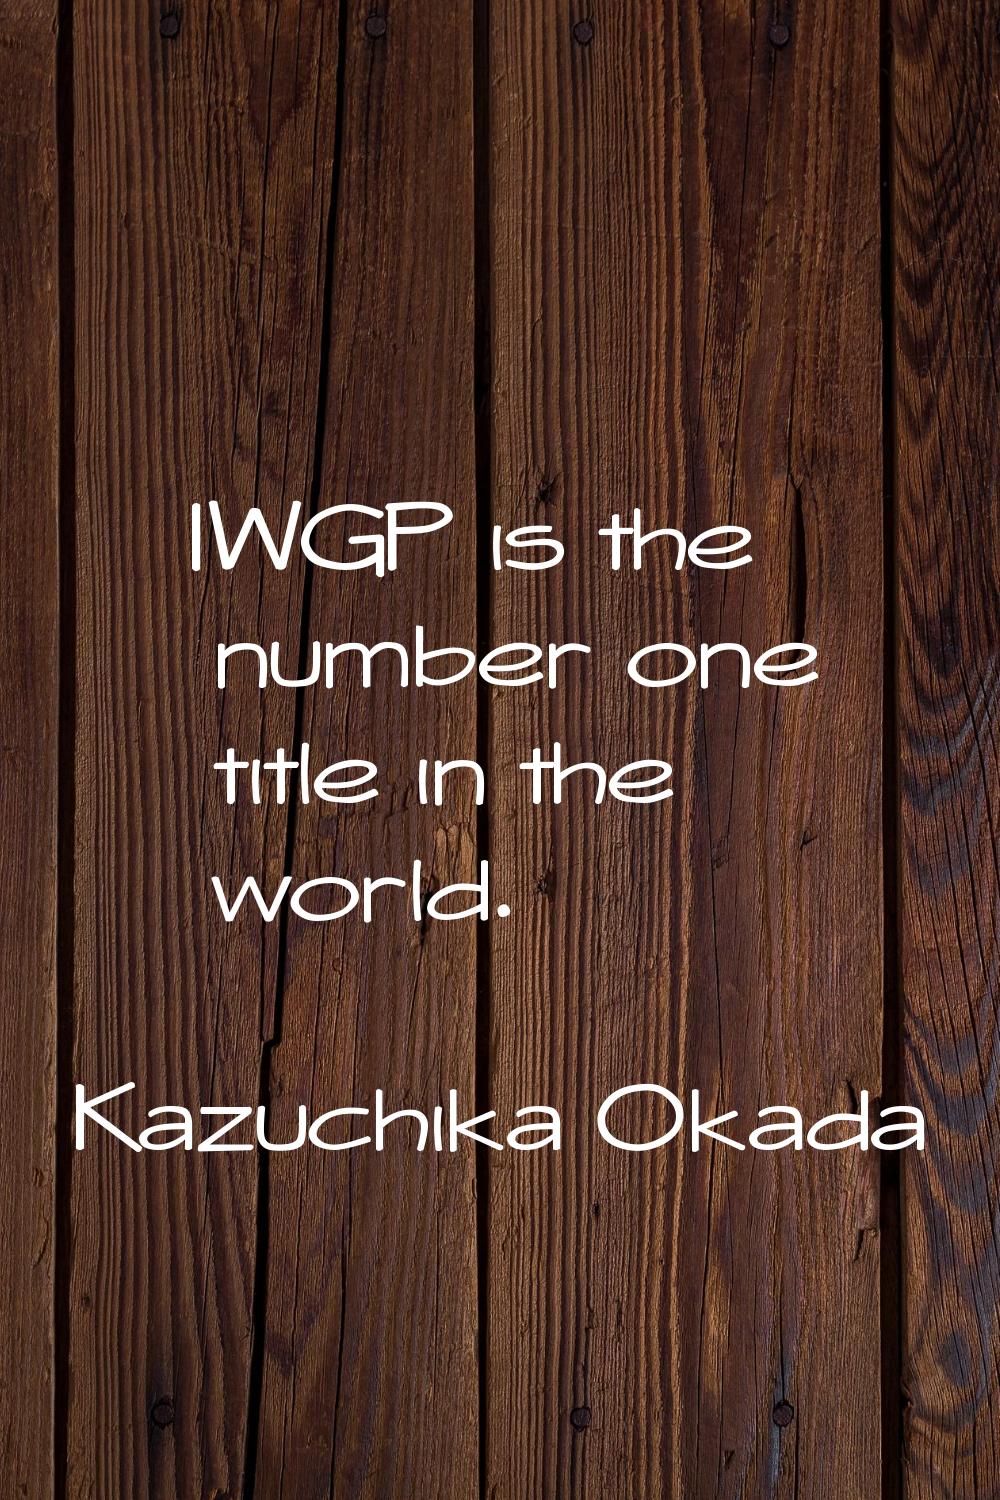 IWGP is the number one title in the world.